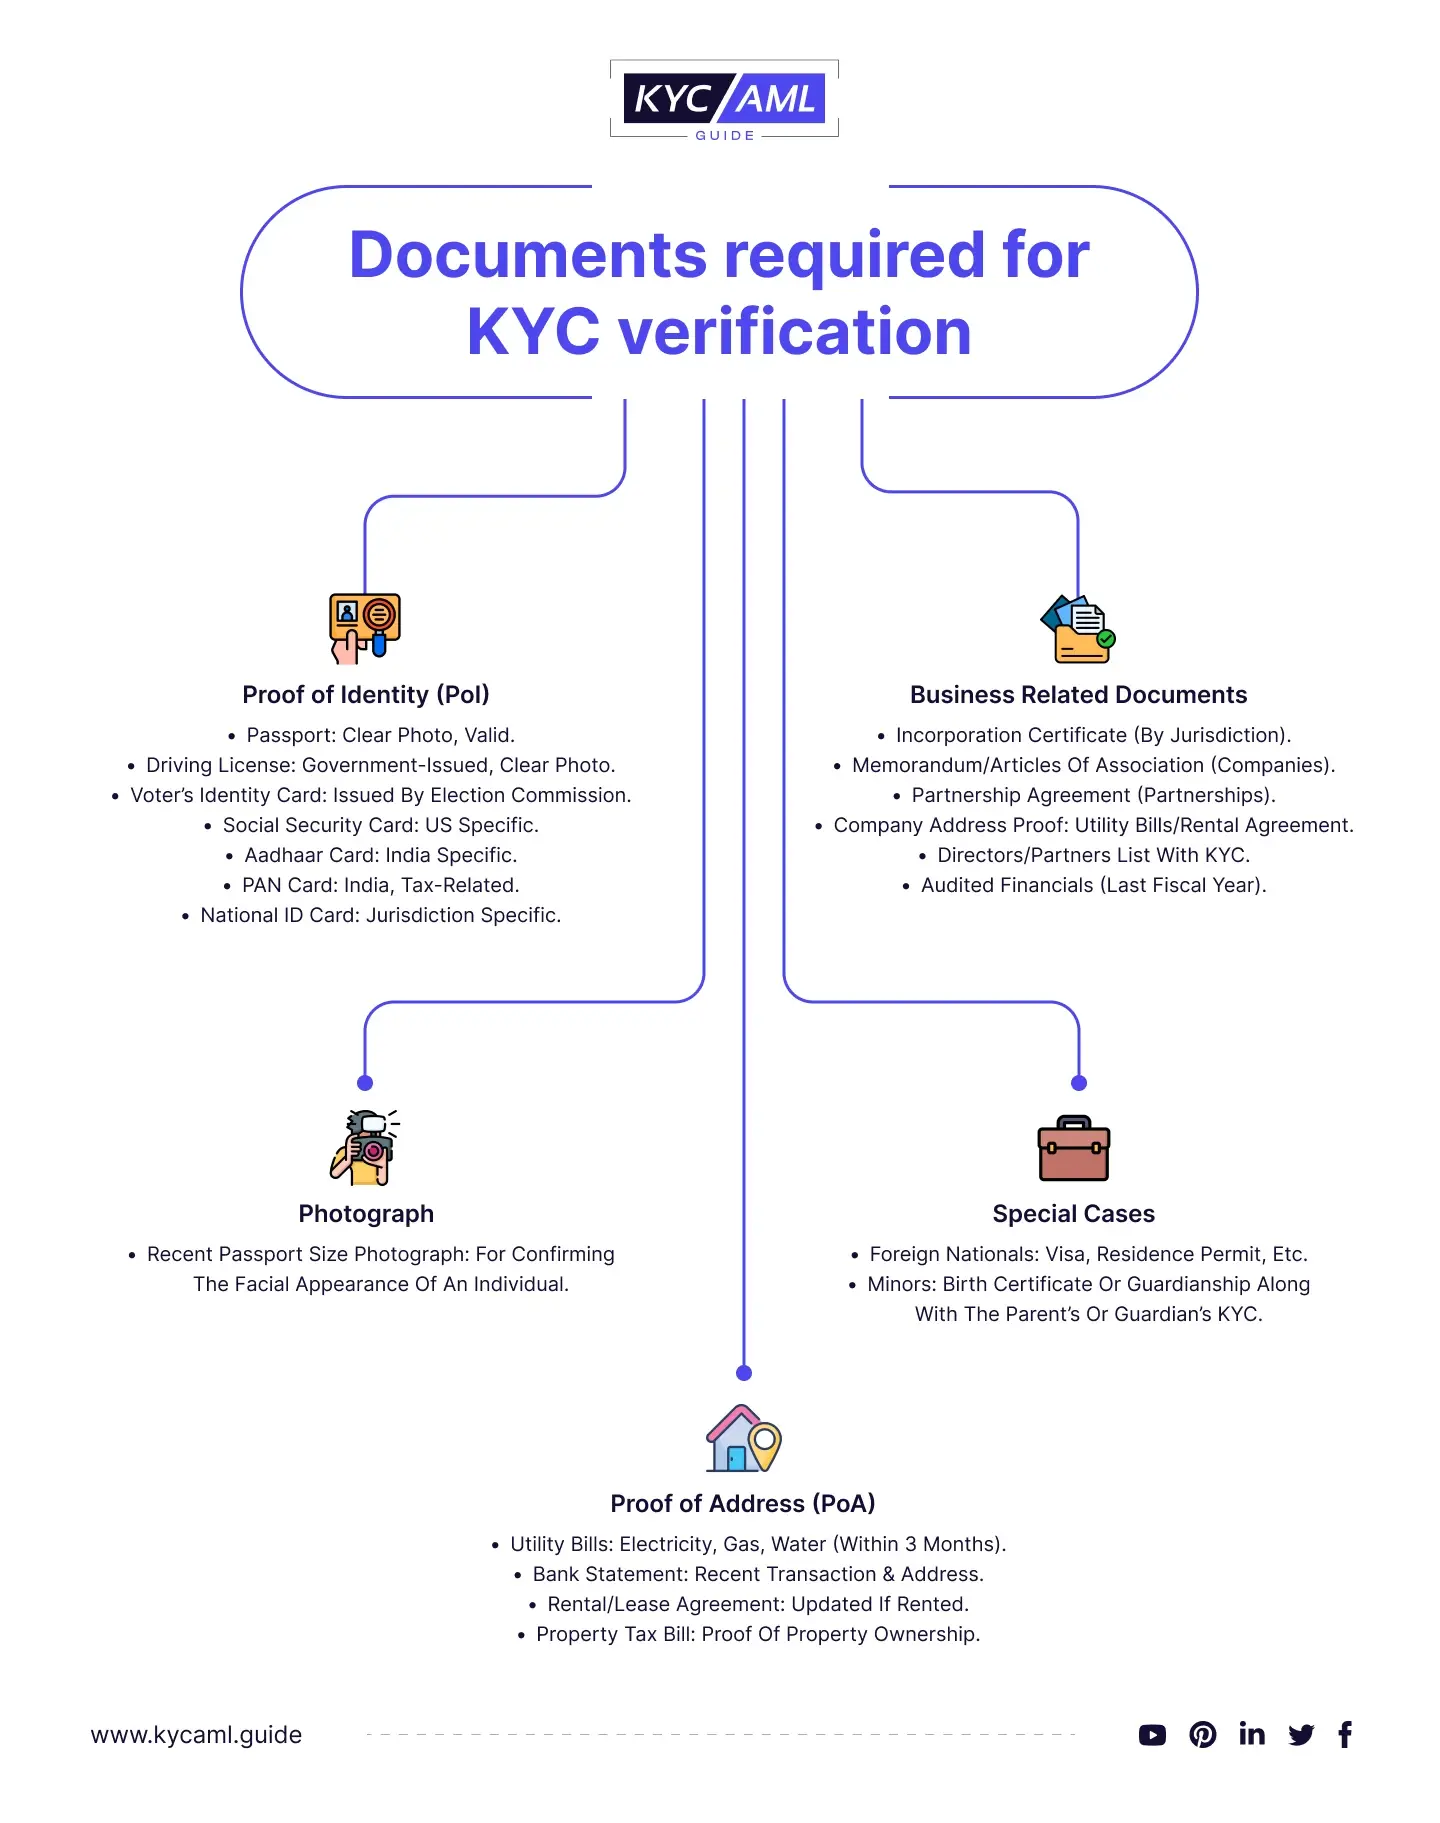 this Infographic shows Documents required for KYC verification